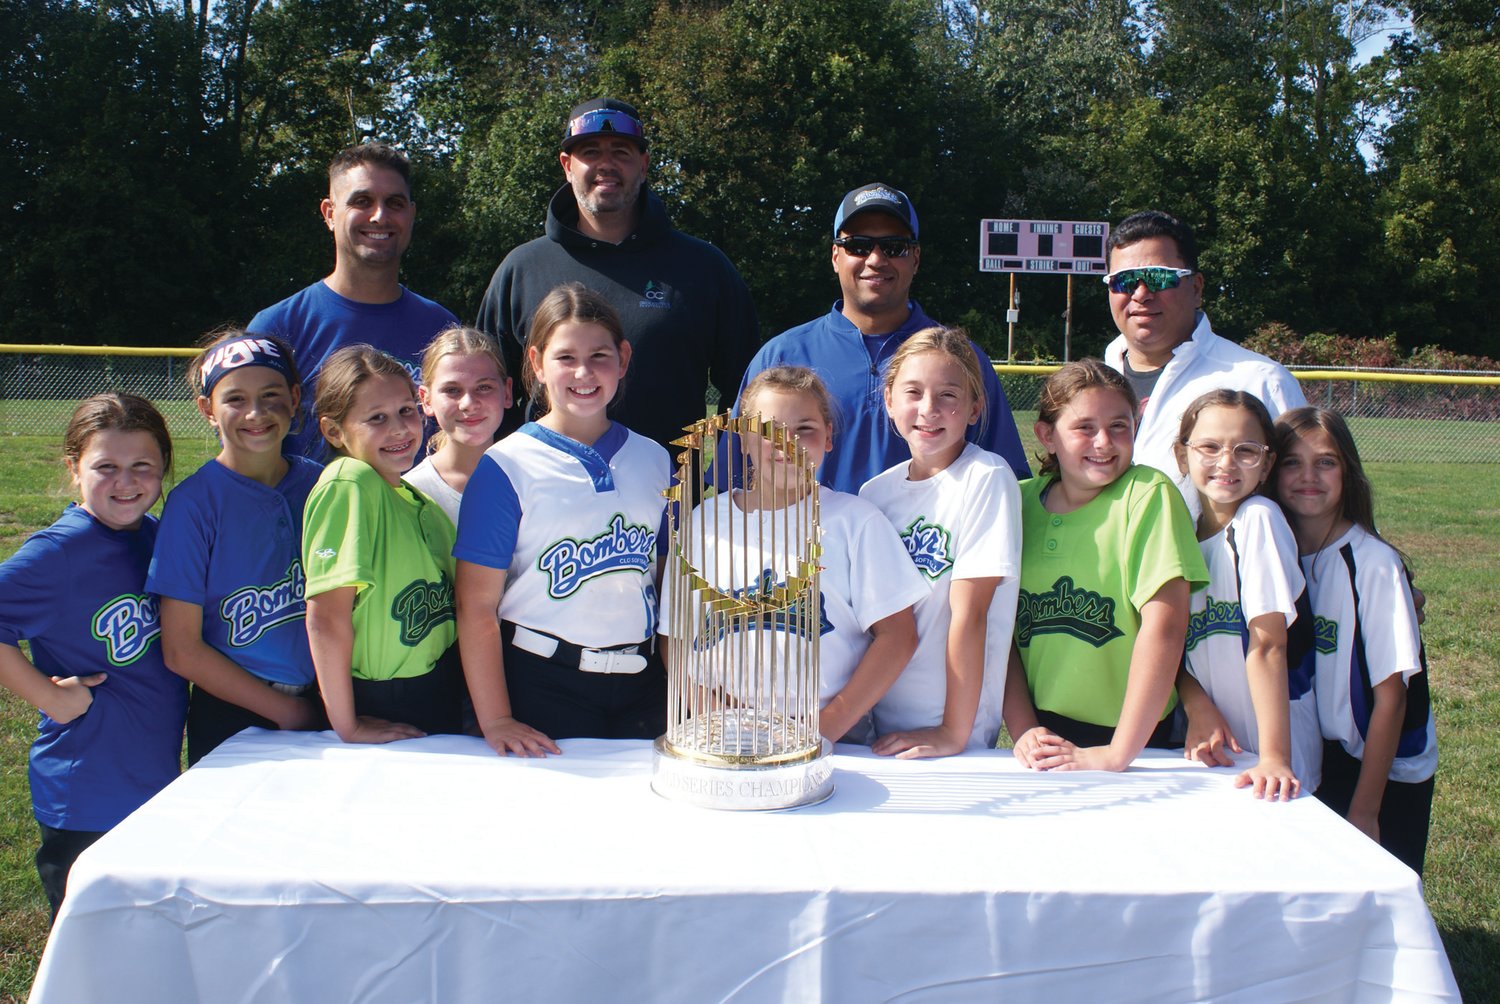 FOR THE TEAM: Pictured with the 2018 World Series trophy at Brayton Field are
coaches and players from the CLCF Bomber’s Travel Team (10 U).